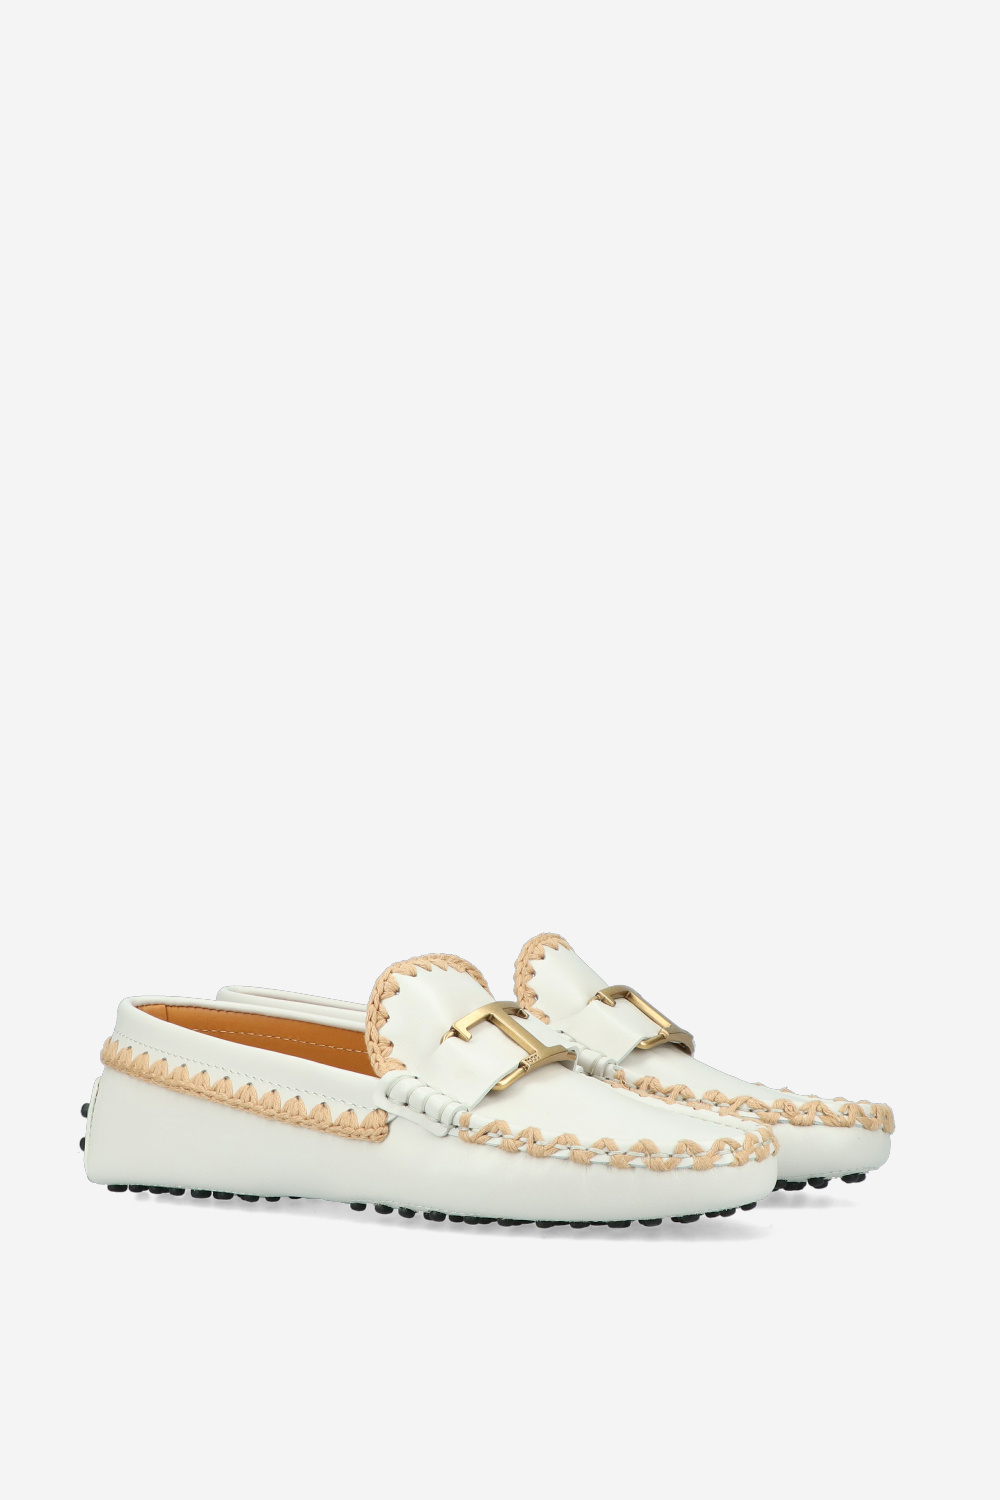 Tods Loafers Beige